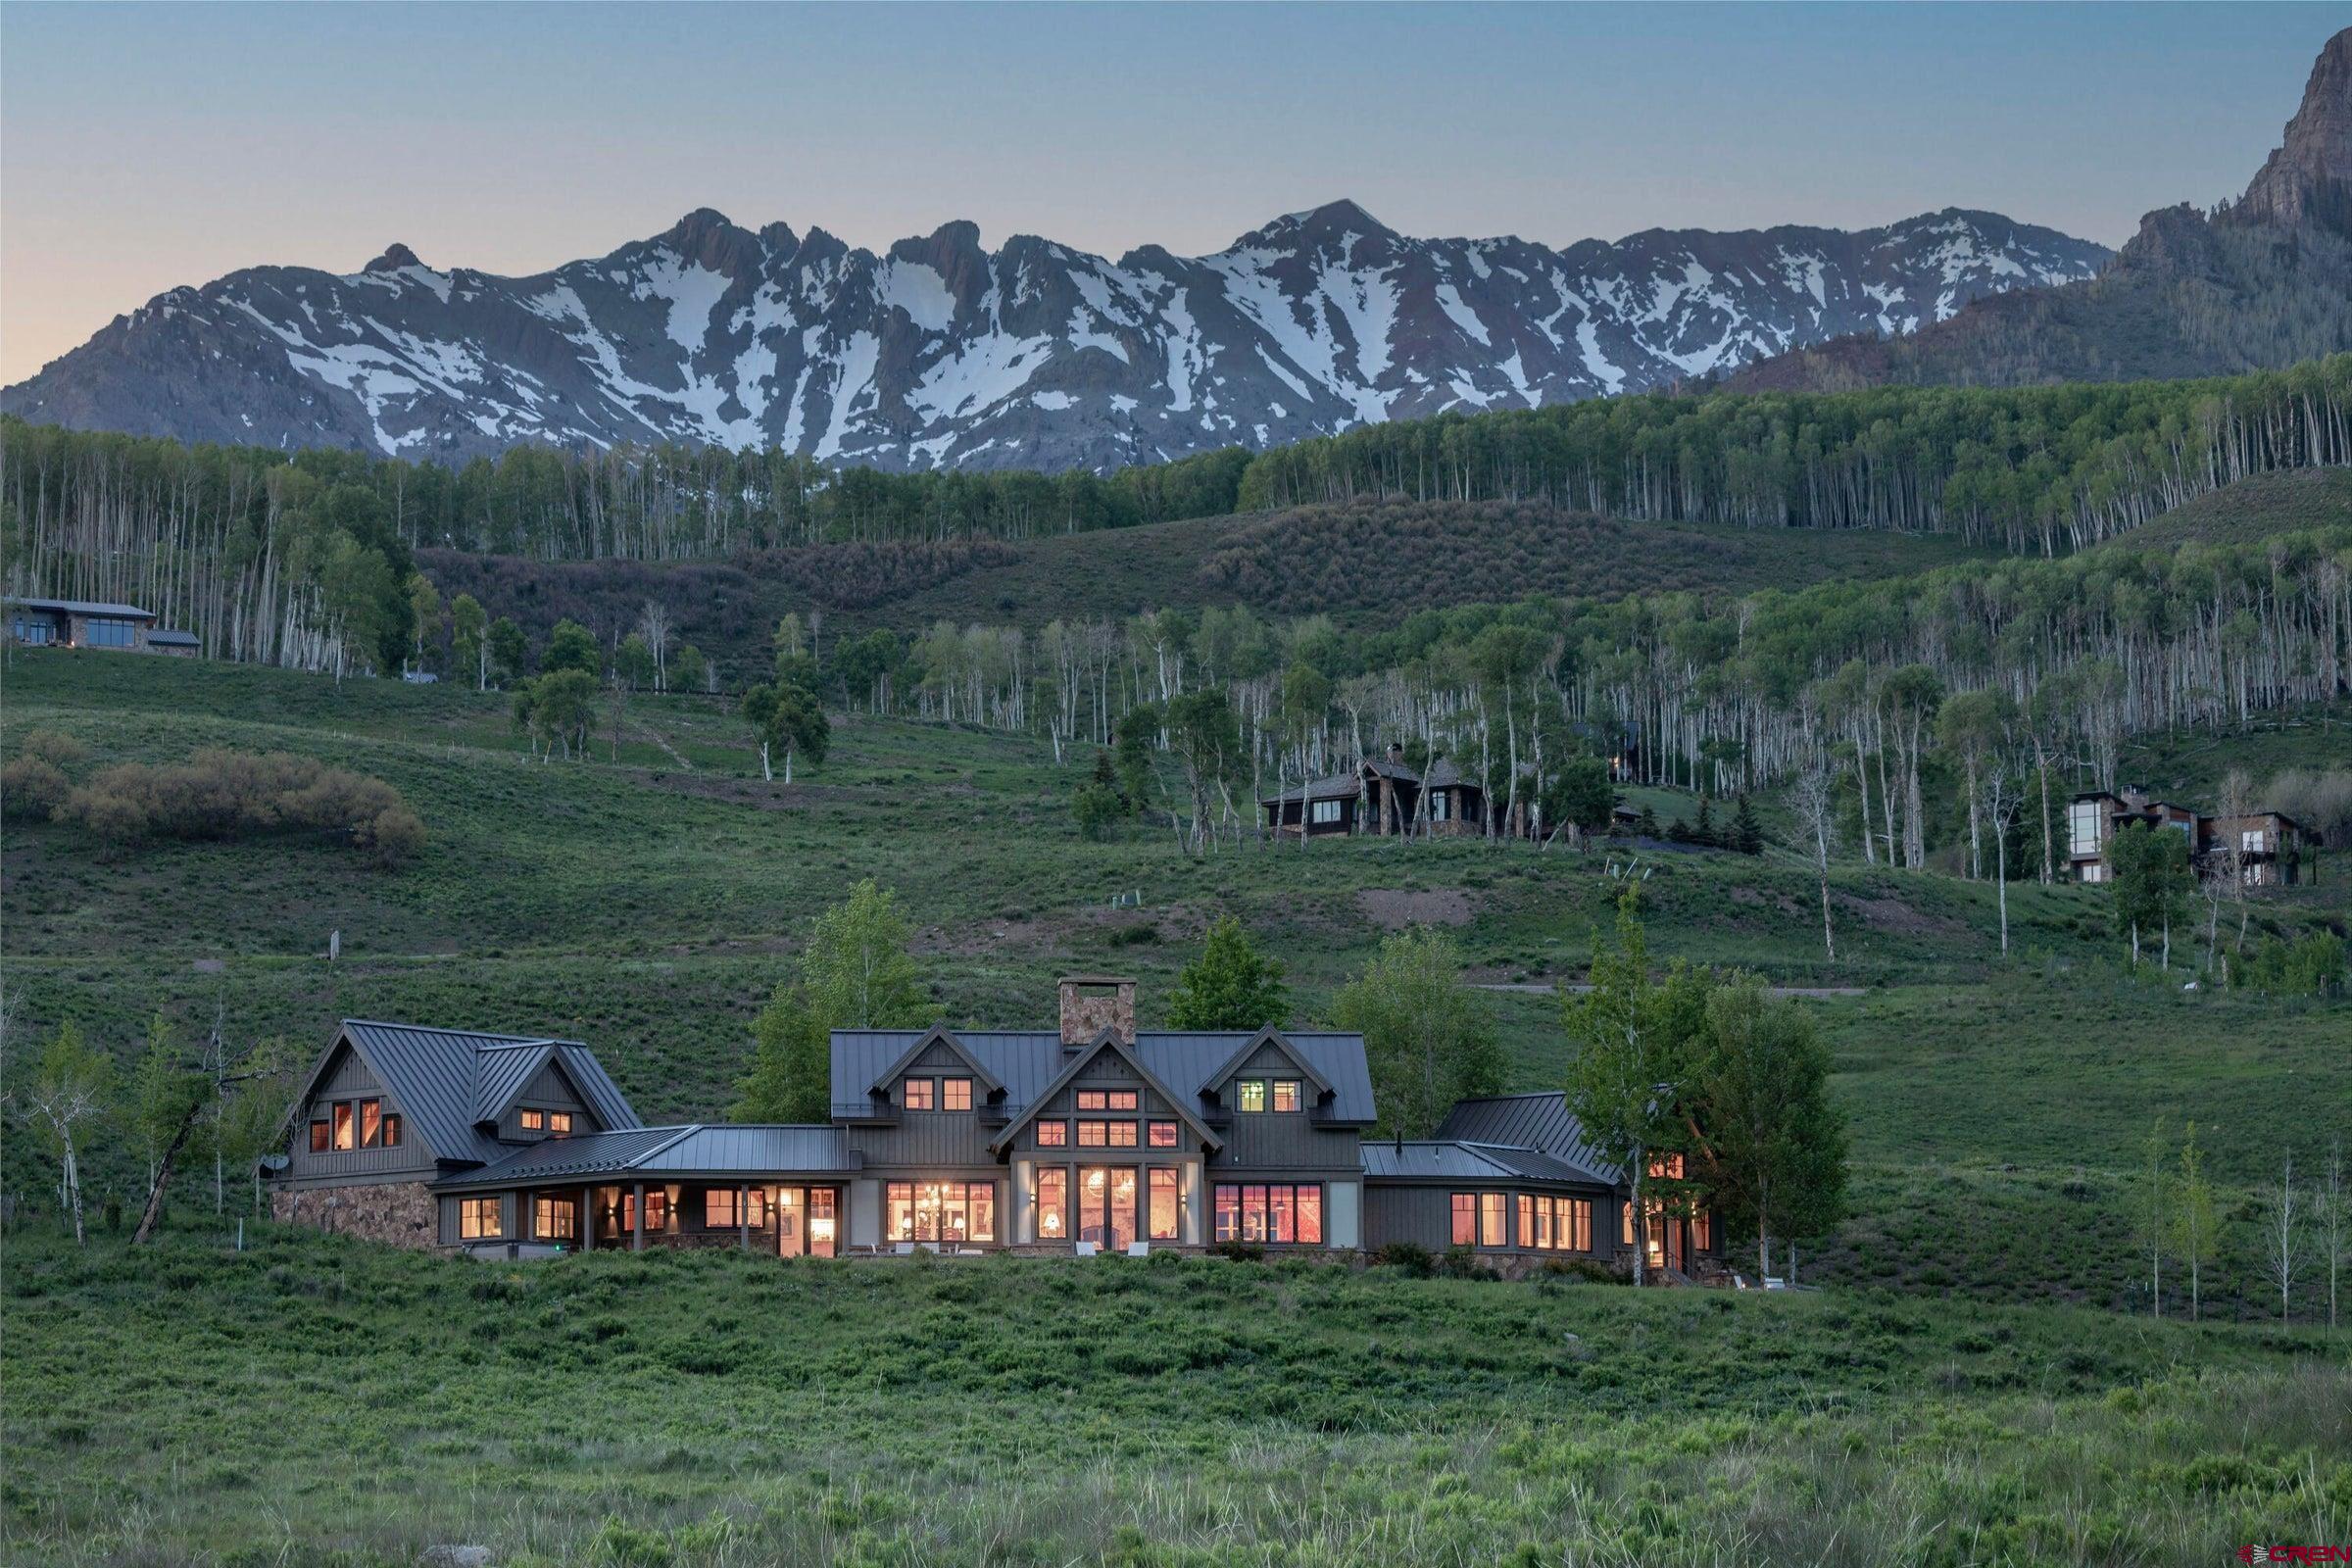 101 Josefa Ln is situated on 7 private acres in the Aldasoro Subdivision in beautiful Telluride, Co. 3 lots were joined to create one of the best settings in all of Telluride, yet only 10 minutes from both town and MV. A stately driveway leads up to the home, nestled on an expansive flat perch overlooking 50 acres of permanent open space, where herds of elk congregate in yearly migration. The south facing house is drenched in sun and its 270-degree views span from Campbell Peak across the box canyon and ski resort to Mt Wilson and beyond. Floor-plan is mostly 1 level and perfectly situated to have sweeping views from nearly every room. This stunning mountain home has recently undergone a complete transformation, remodeled extensively with gorgeous custom finishes and modern amenities.